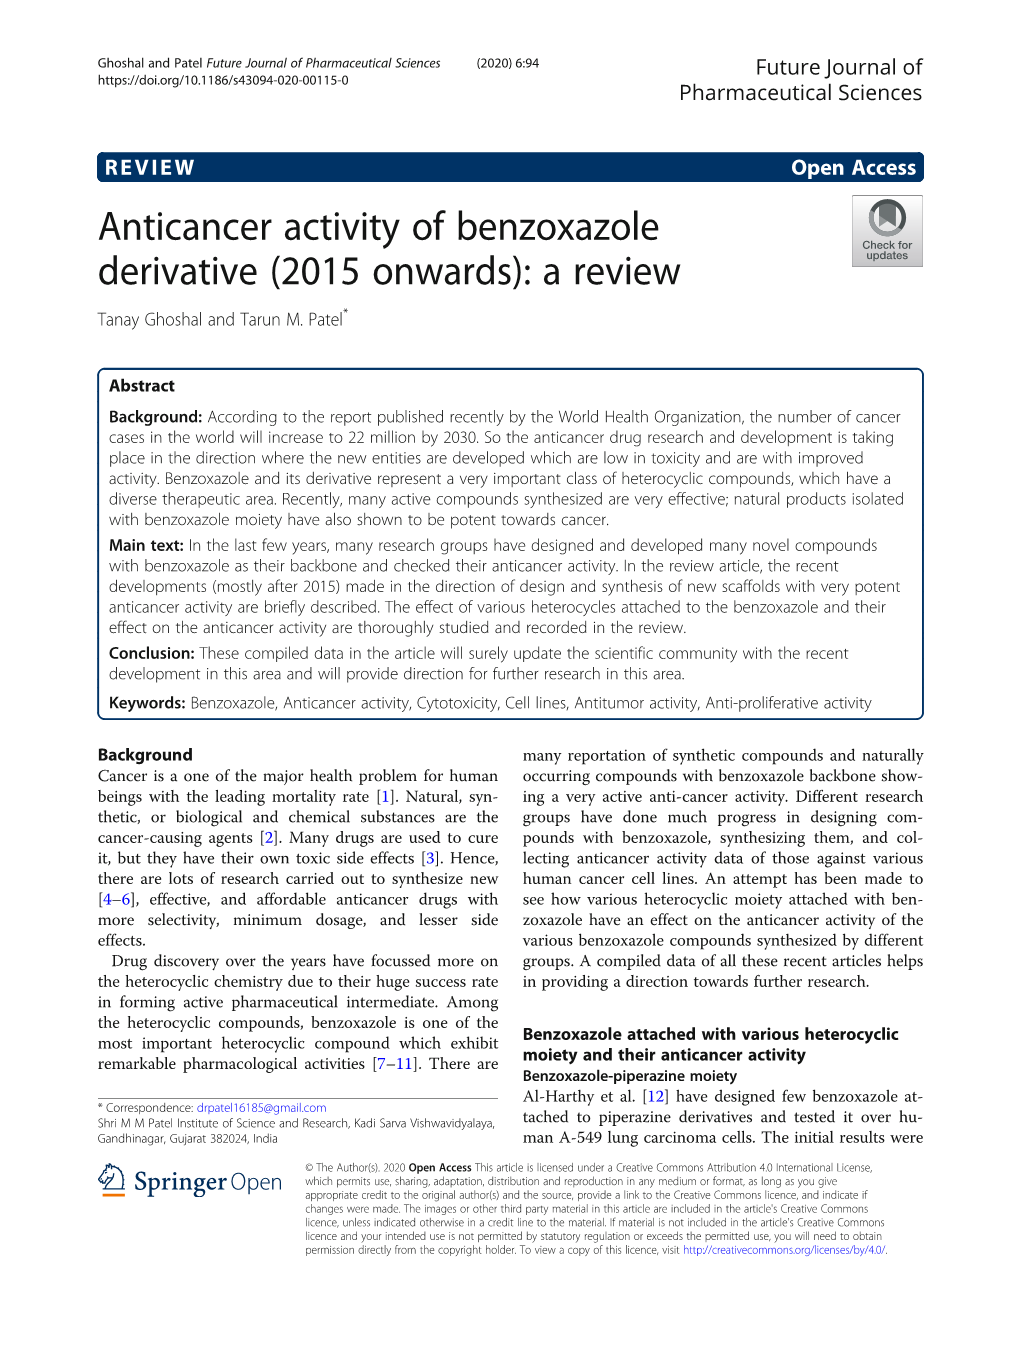 Anticancer Activity of Benzoxazole Derivative (2015 Onwards): a Review Tanay Ghoshal and Tarun M